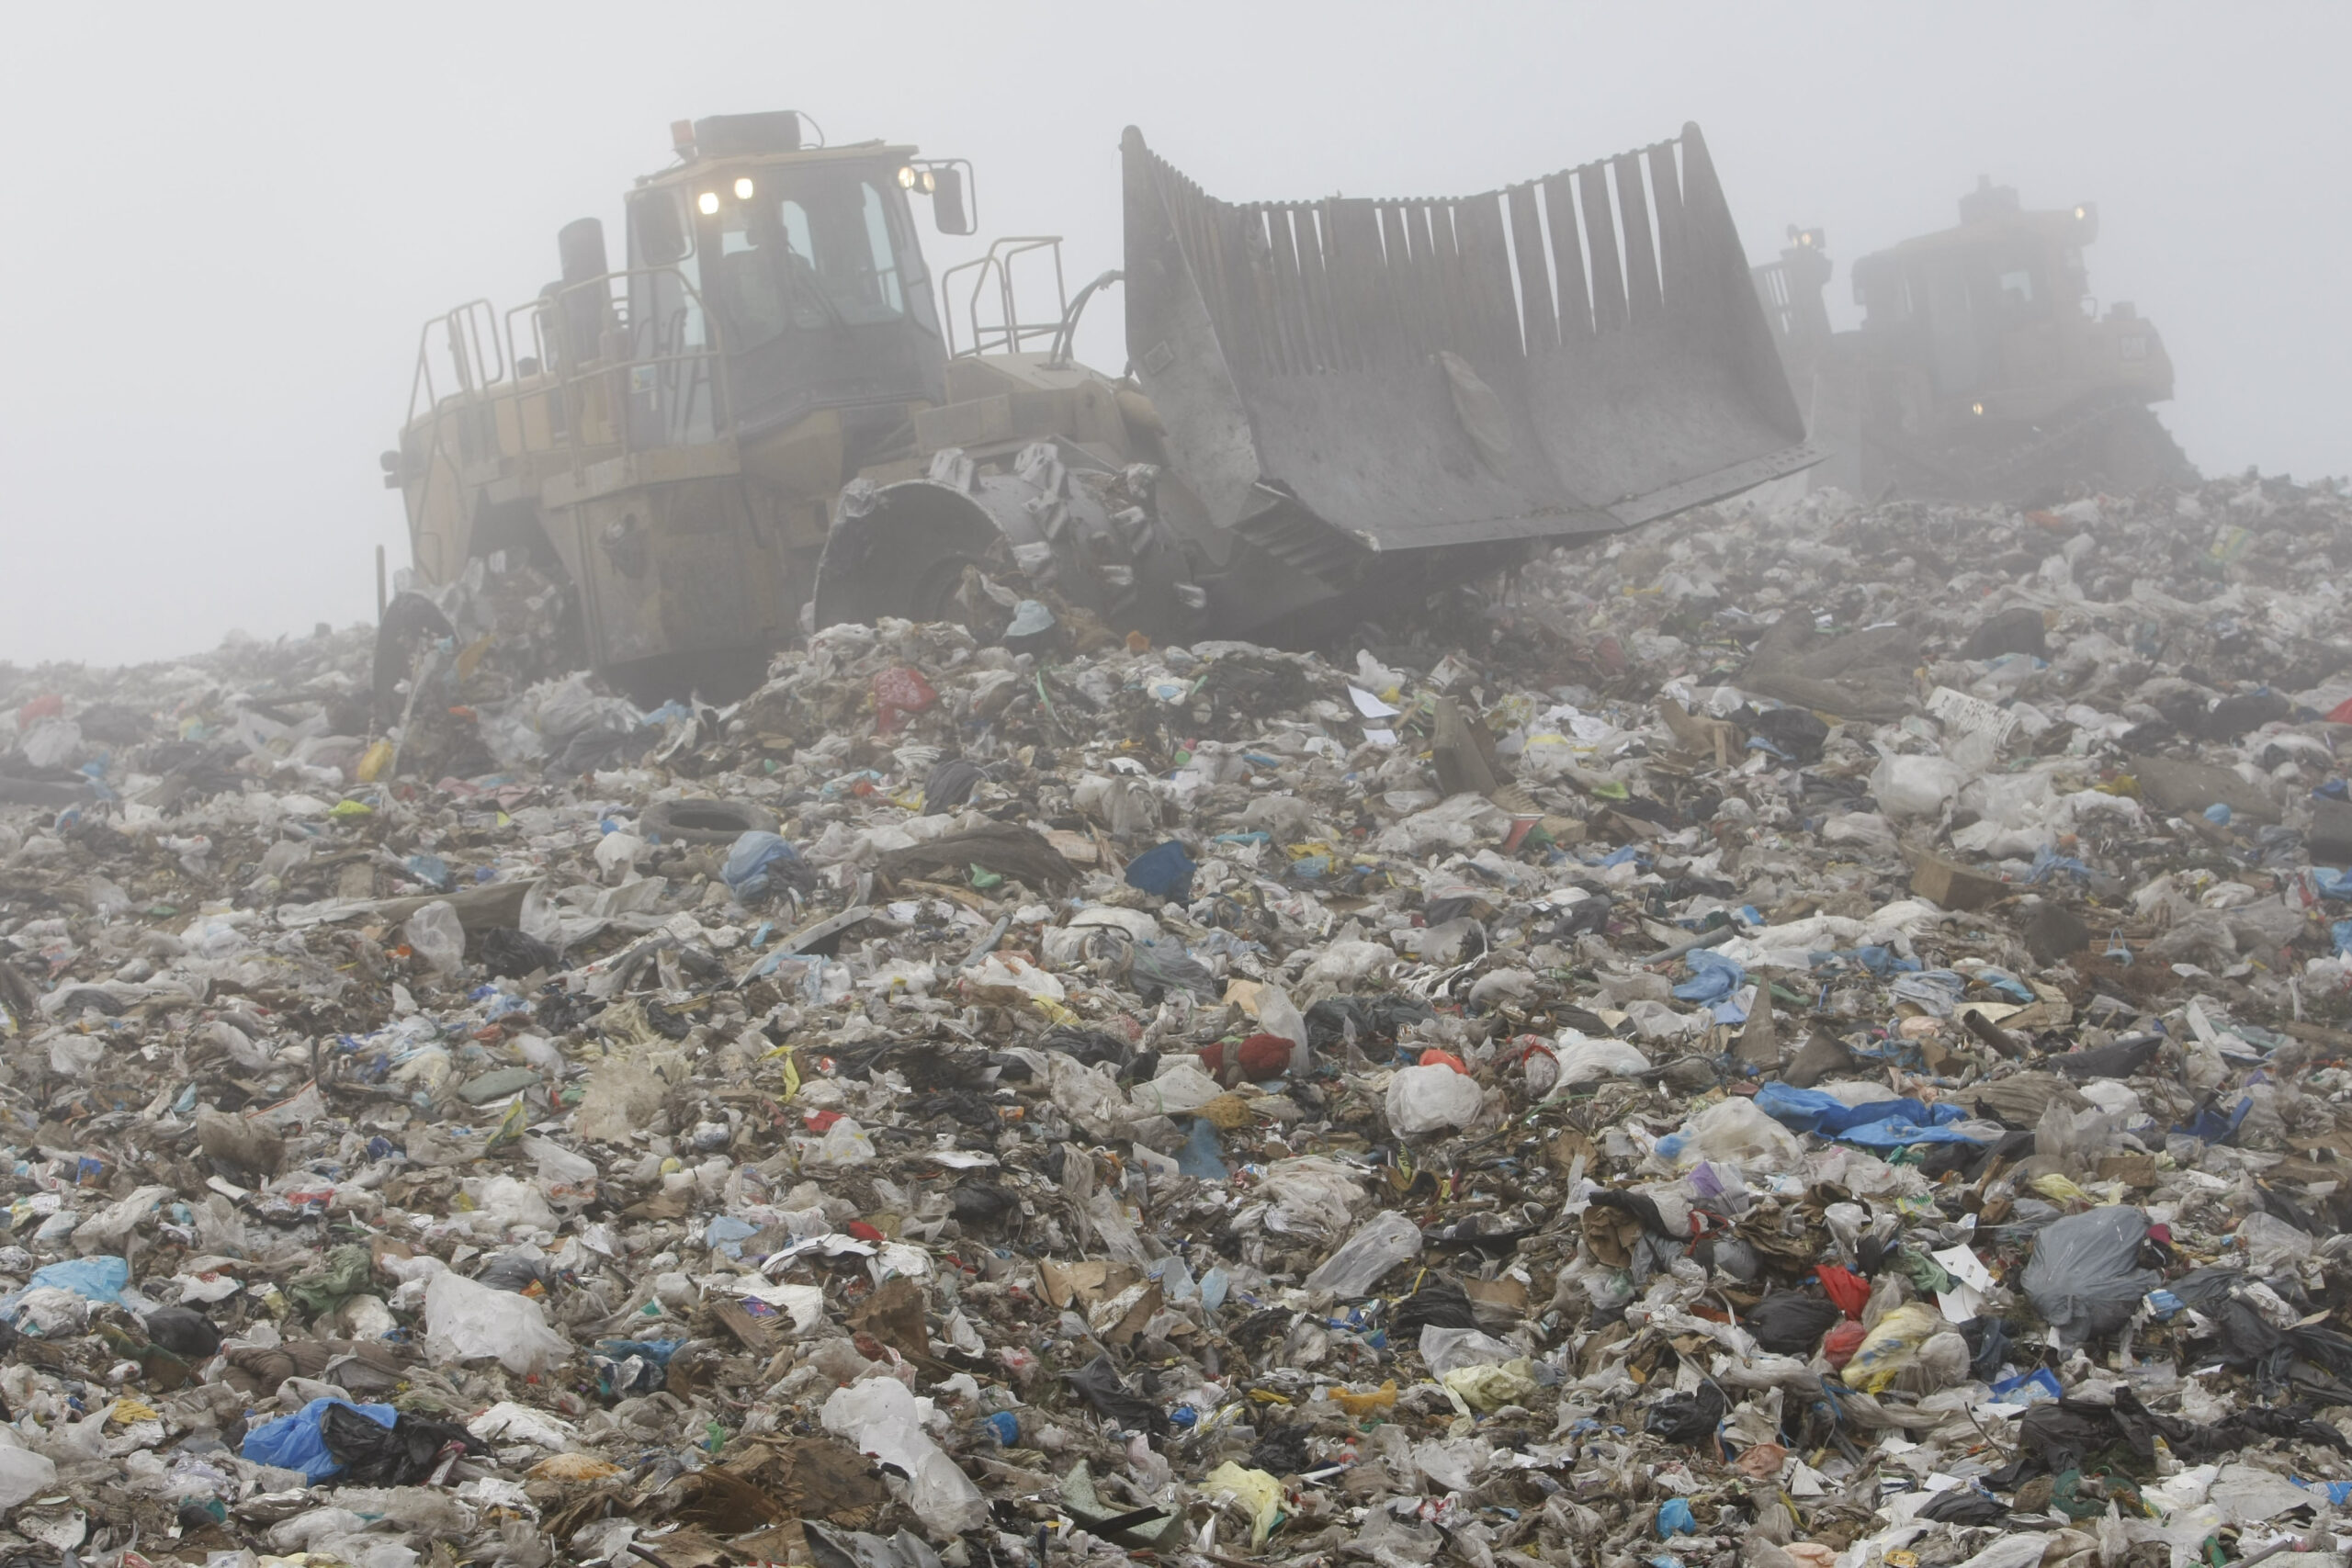 A tractor sorts through waste at a landfill in California